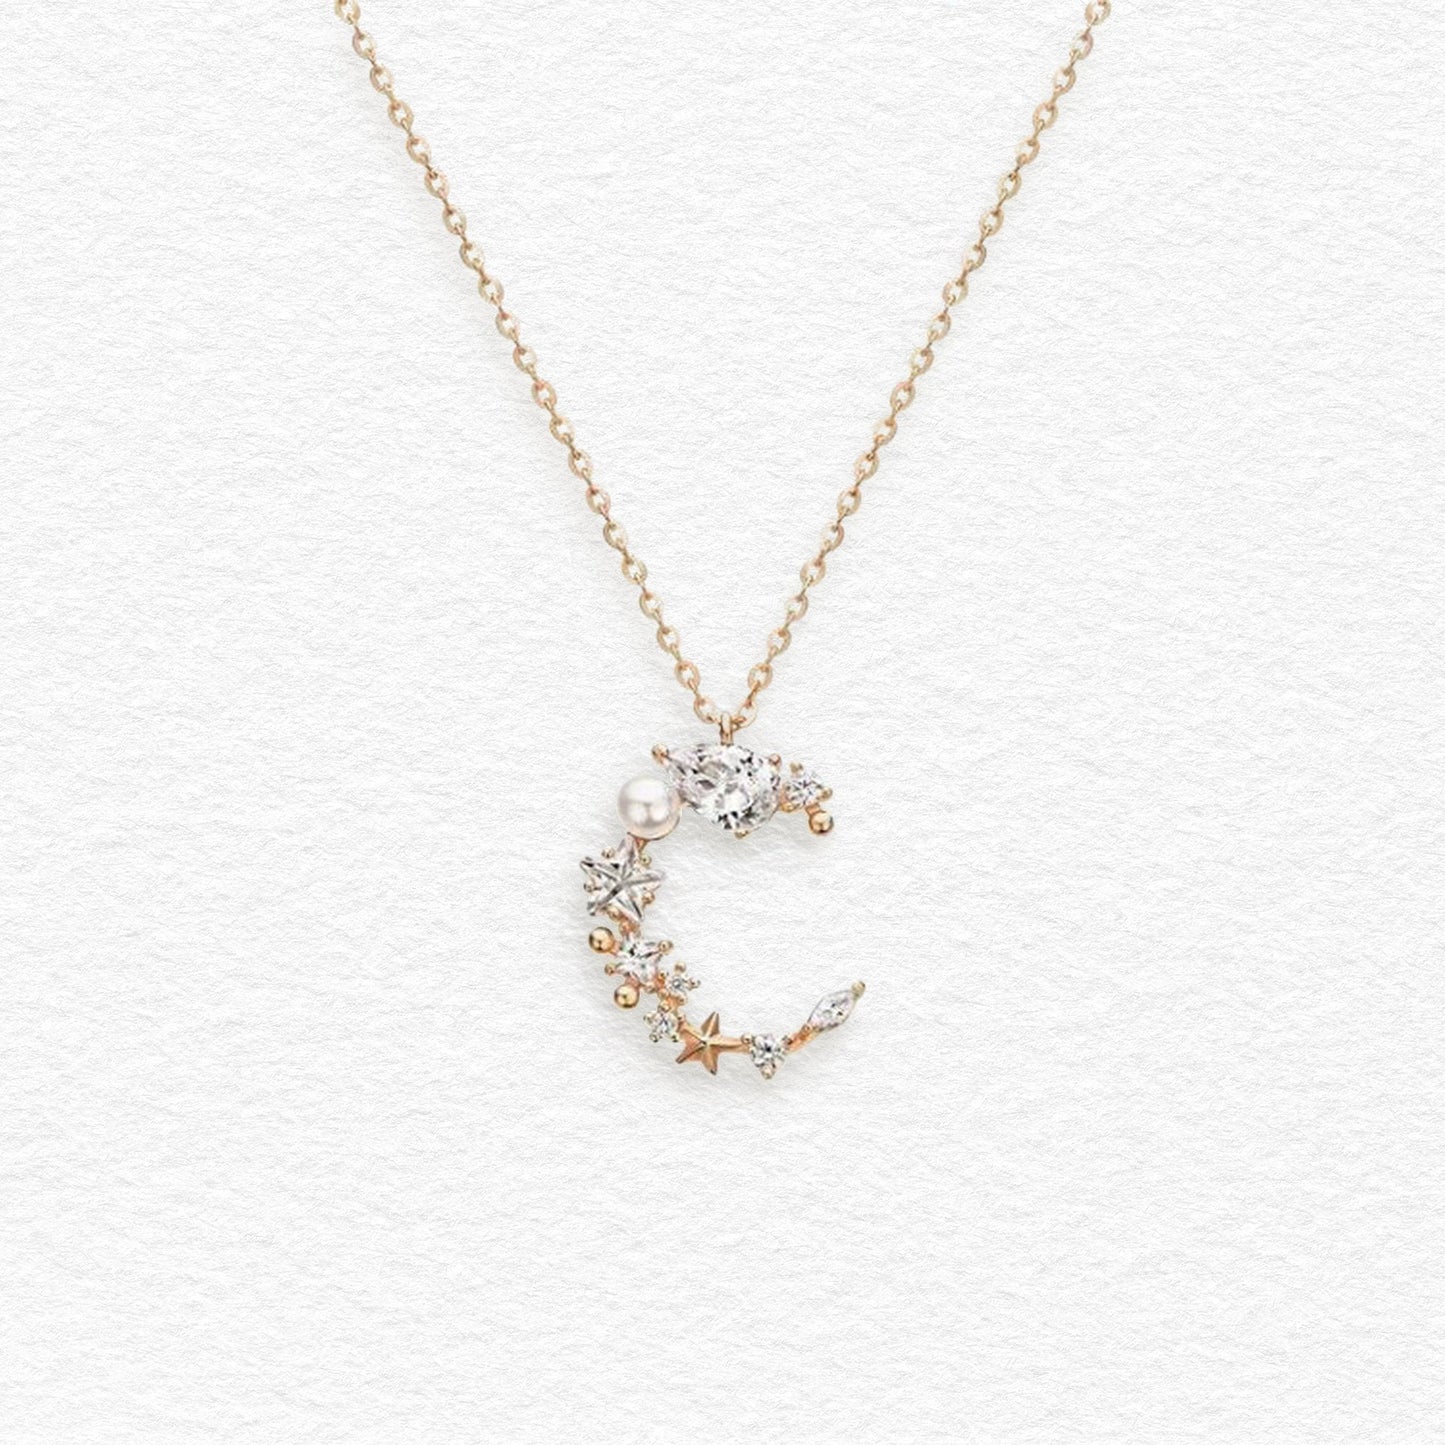 Crescent Moon Pearl and CZ Pendant Necklace, 925 Silver 14K Gold Plated Jewelry, Korean Simple Dainty Style